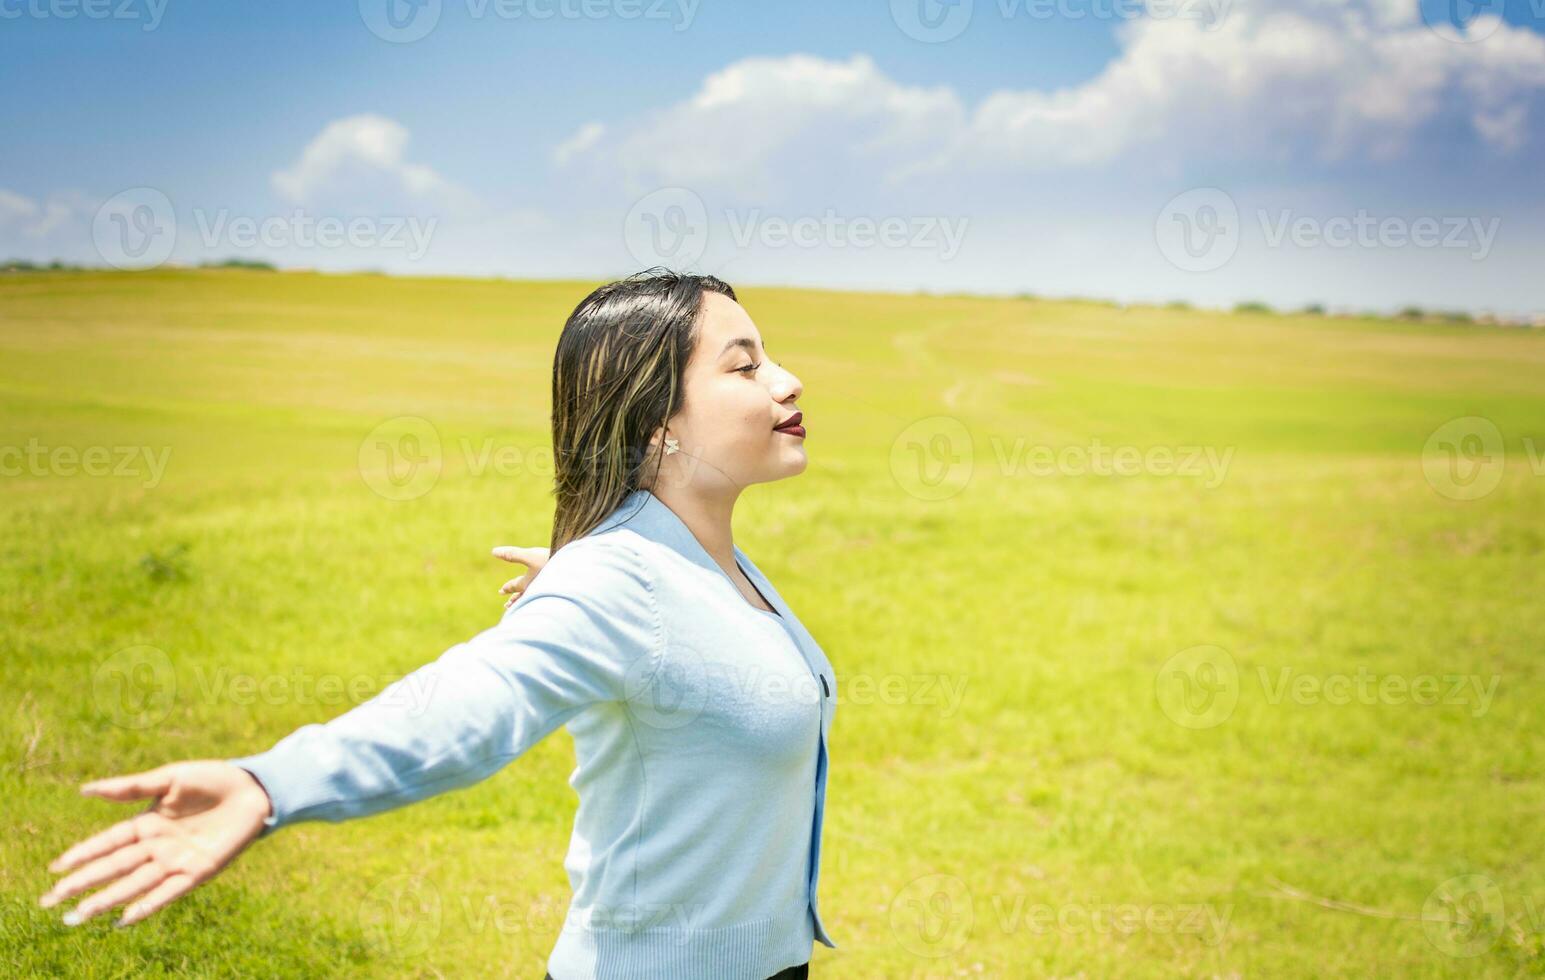 Happy woman breathing fresh air in the field and spreading arms, young woman smiling and spreading her hands in the green field, concept of woman breathing fresh air in the field photo